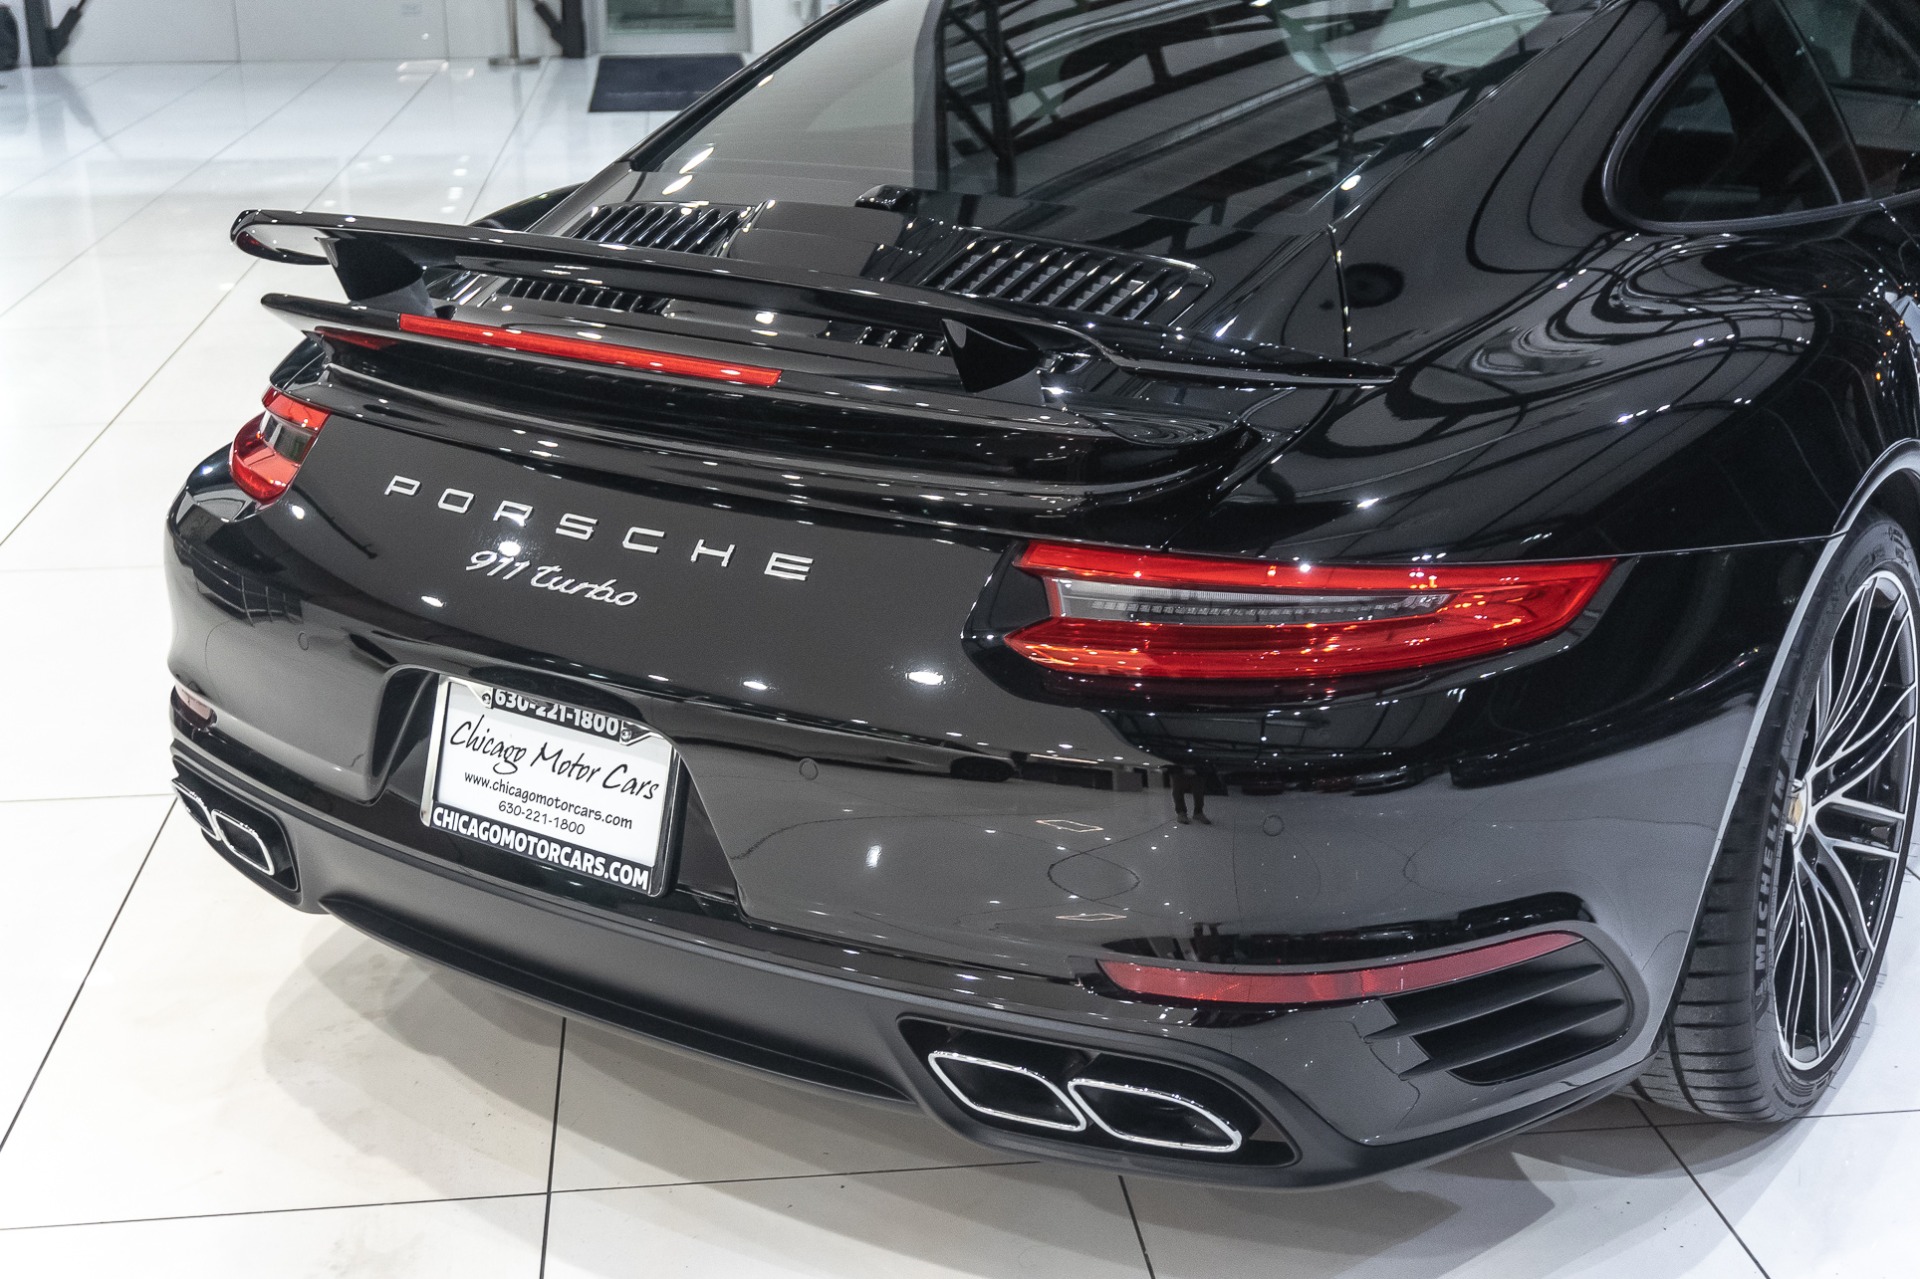 Used-2019-Porsche-911-Turbo-Coupe-MSRP-181K-FRONT-LIFT-BURMESTER-AUDIO